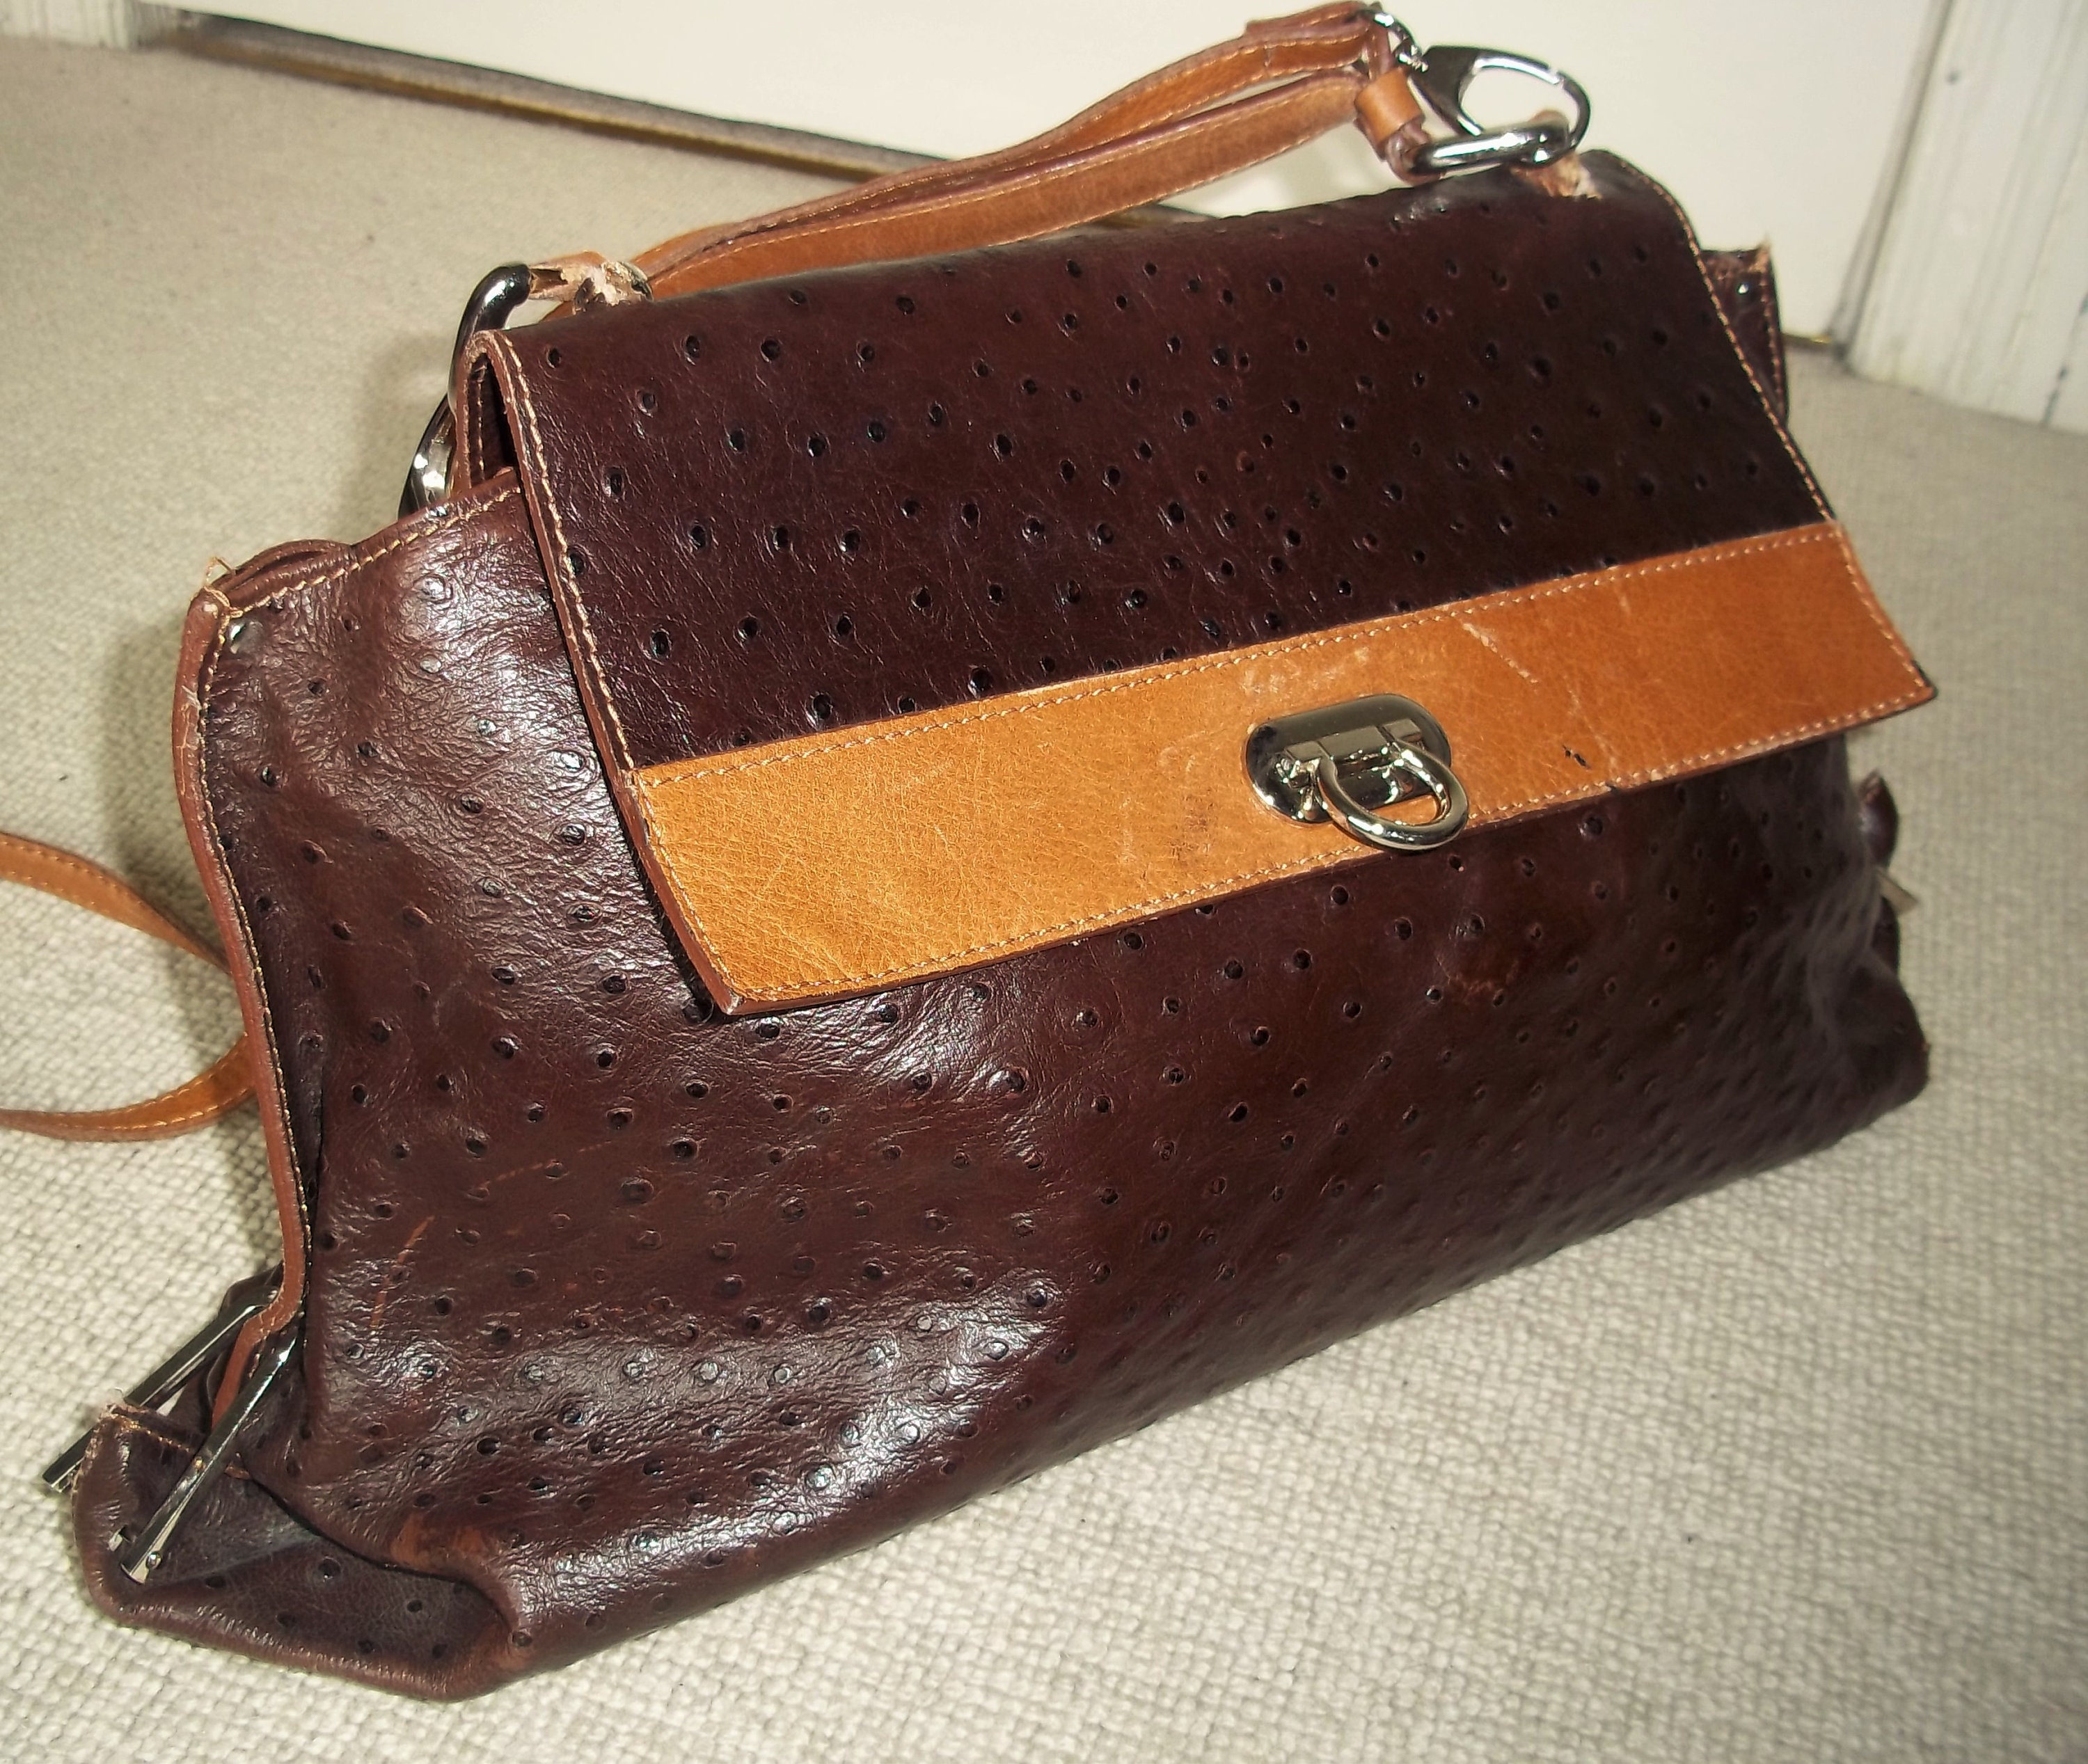 Linda | Ostrich leather tote bag – brown